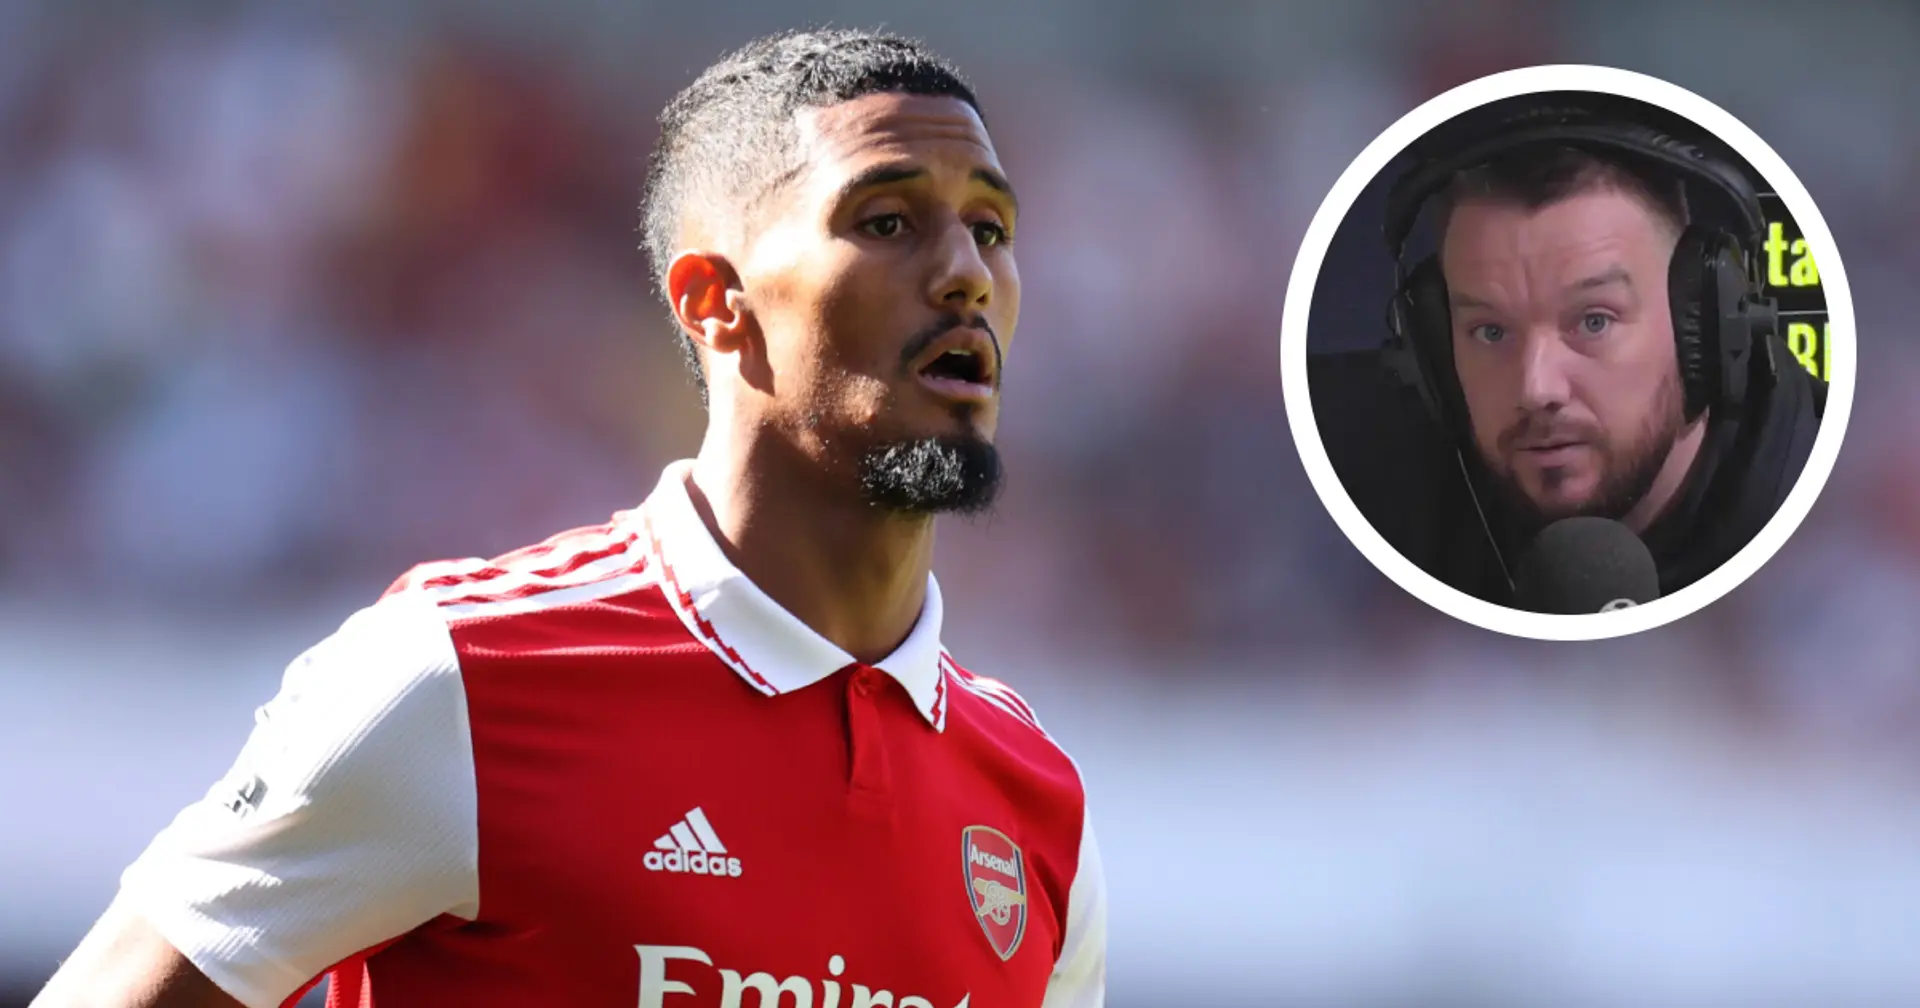 'I absolutely got that wrong': ex-Spurs man Jamie O'Hara apologises to 'real deal' William Saliba